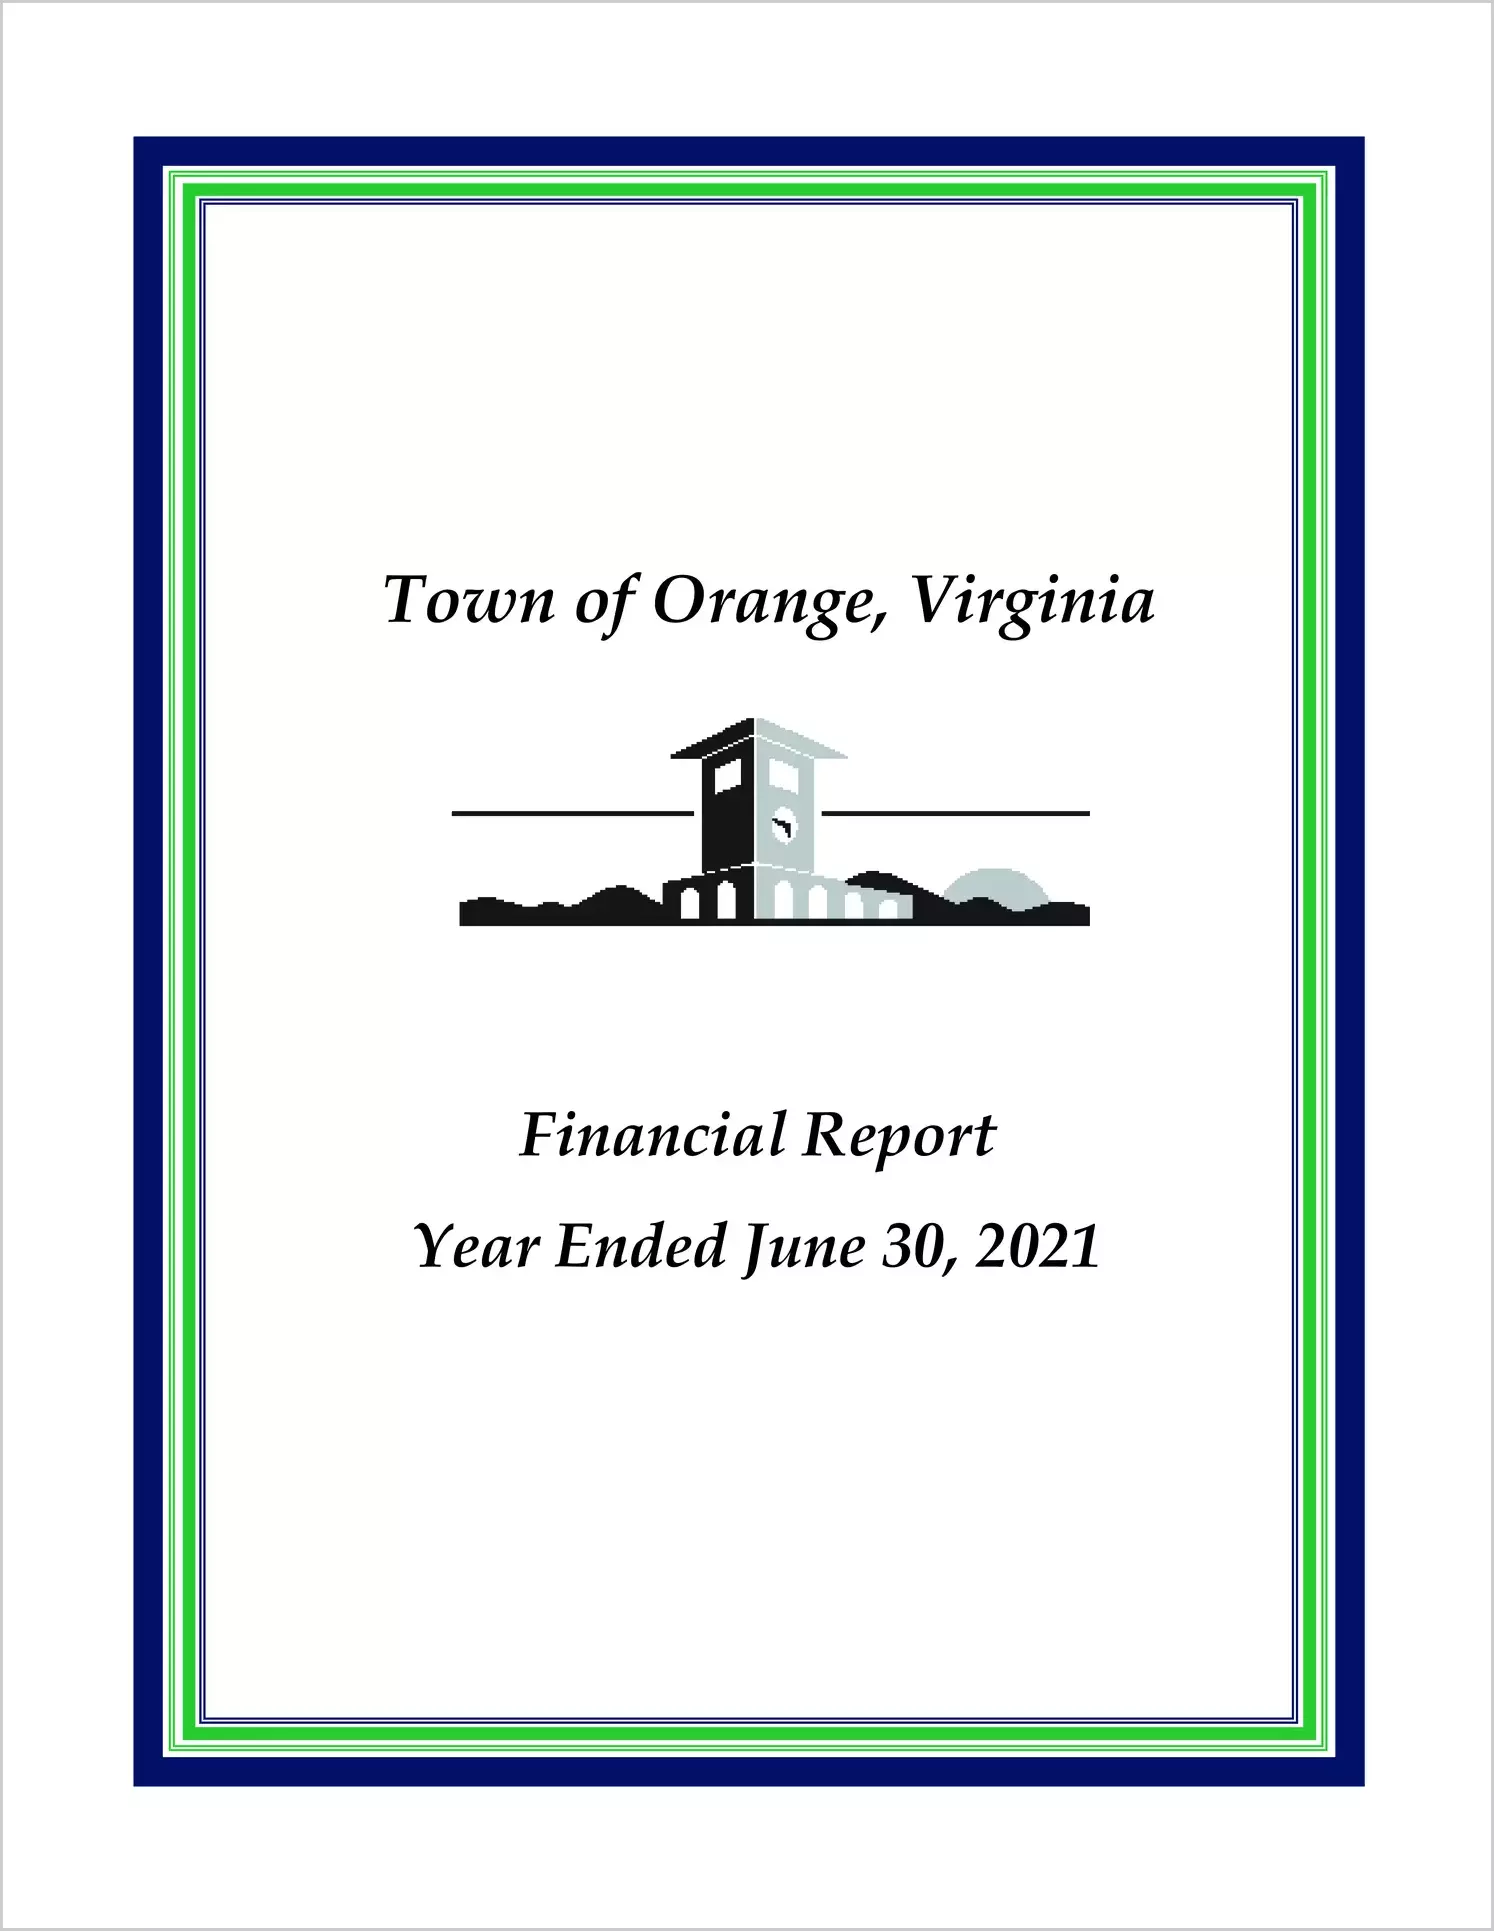 2021 Annual Financial Report for Town of Orange